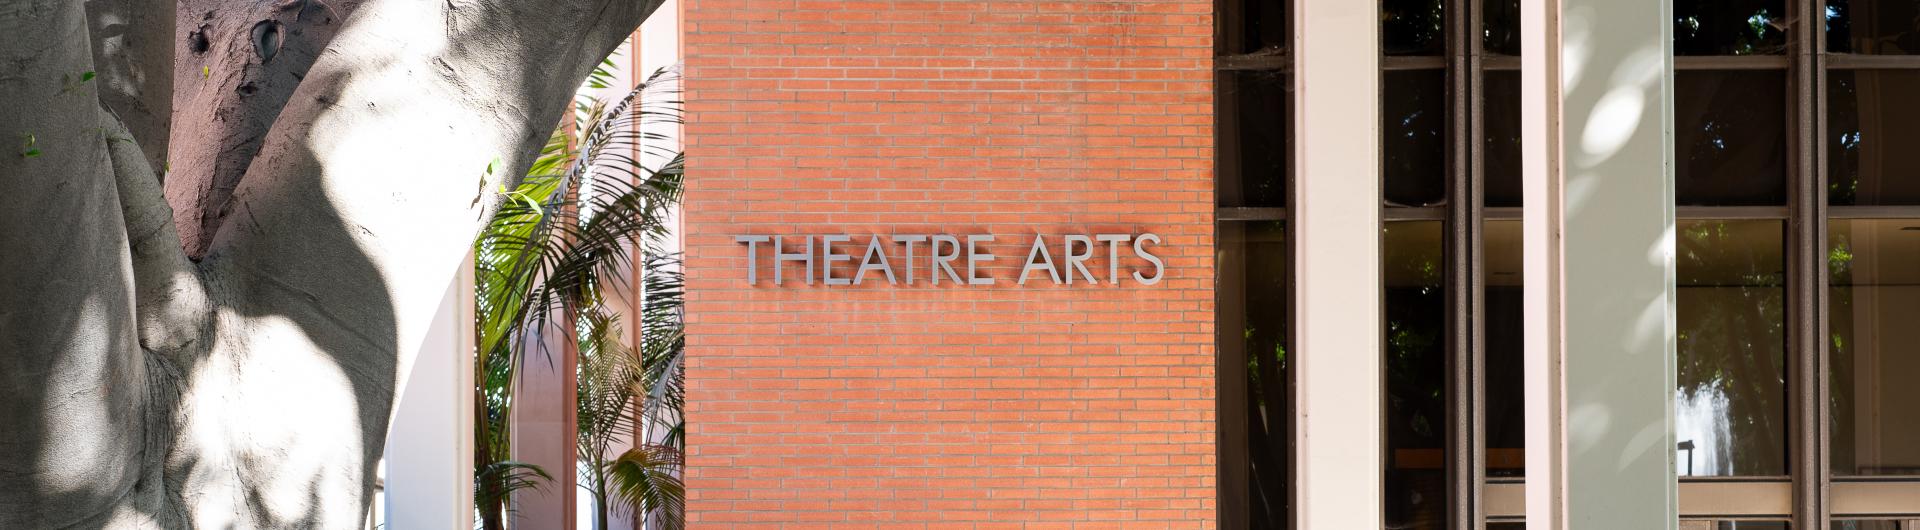 Front of Theatre Arts Building